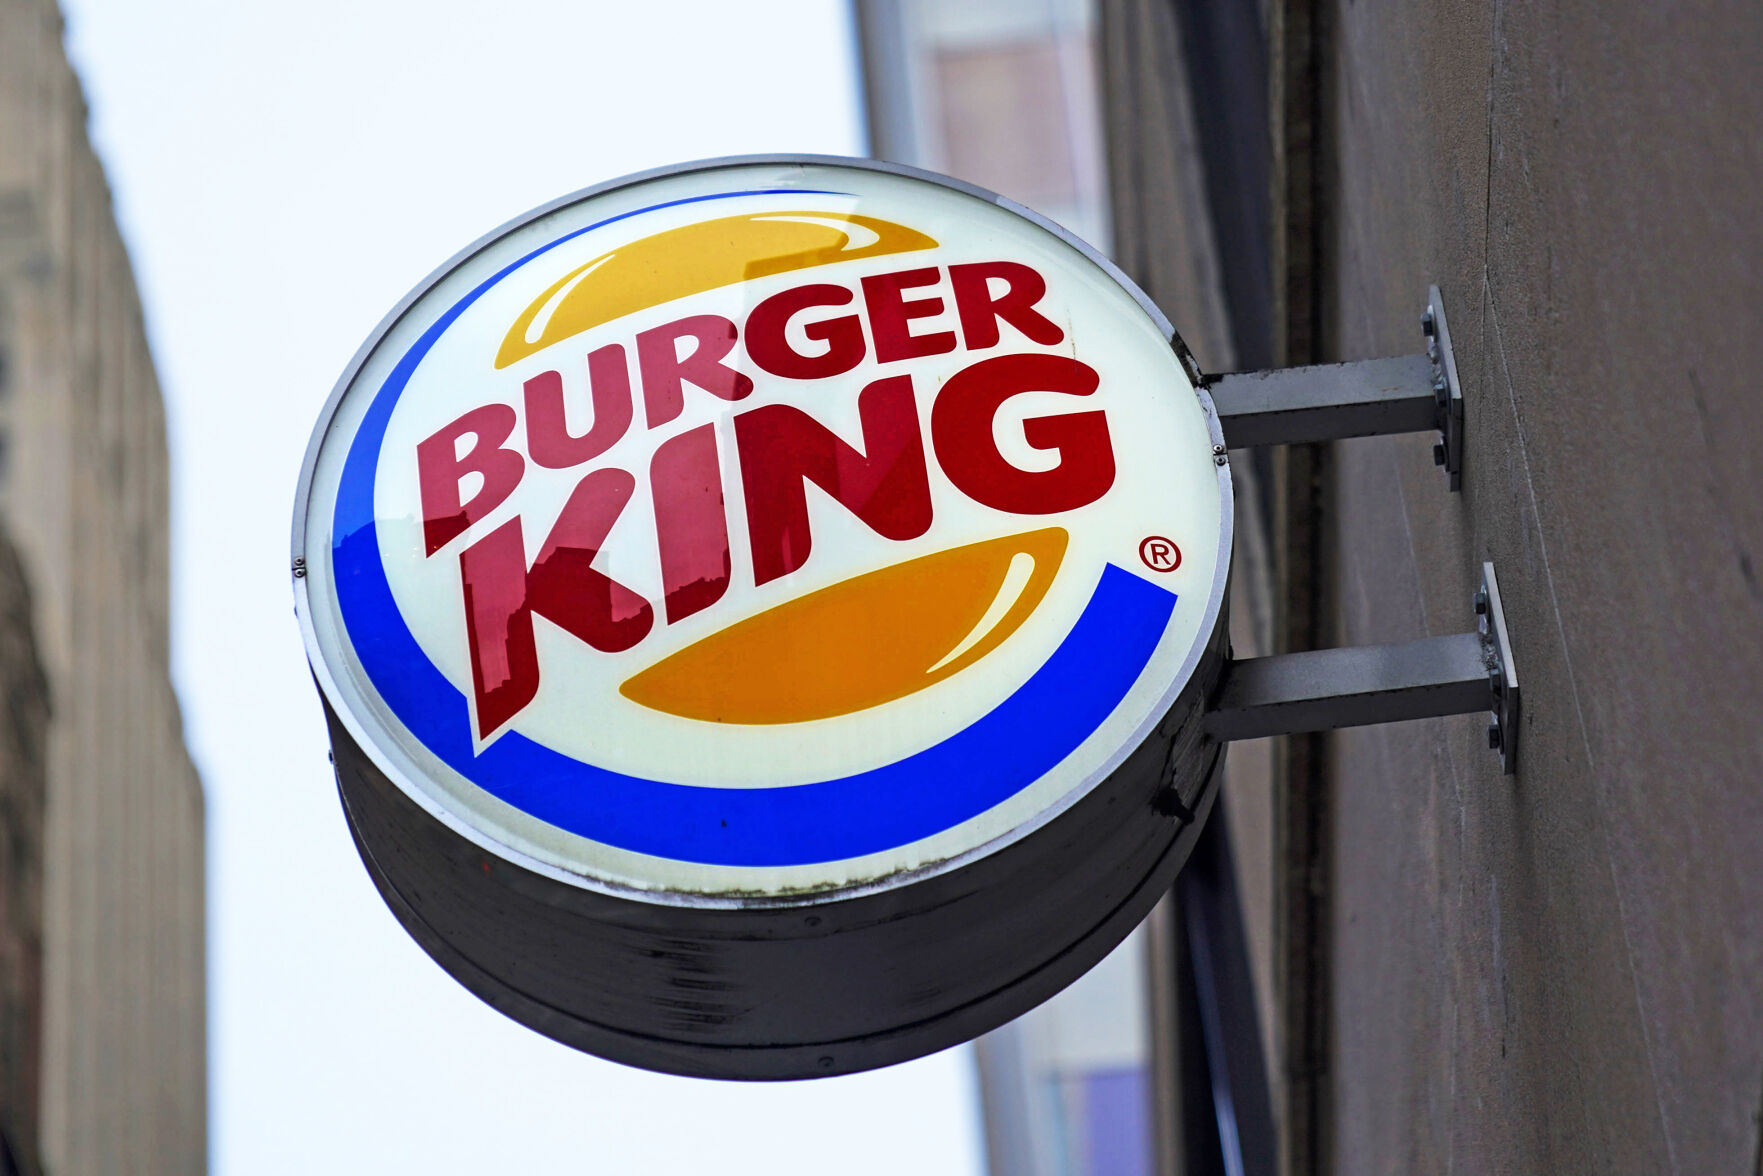 Food ads are in the crosshairs as Burger King, others face lawsuits for false advertising  newspressnow image